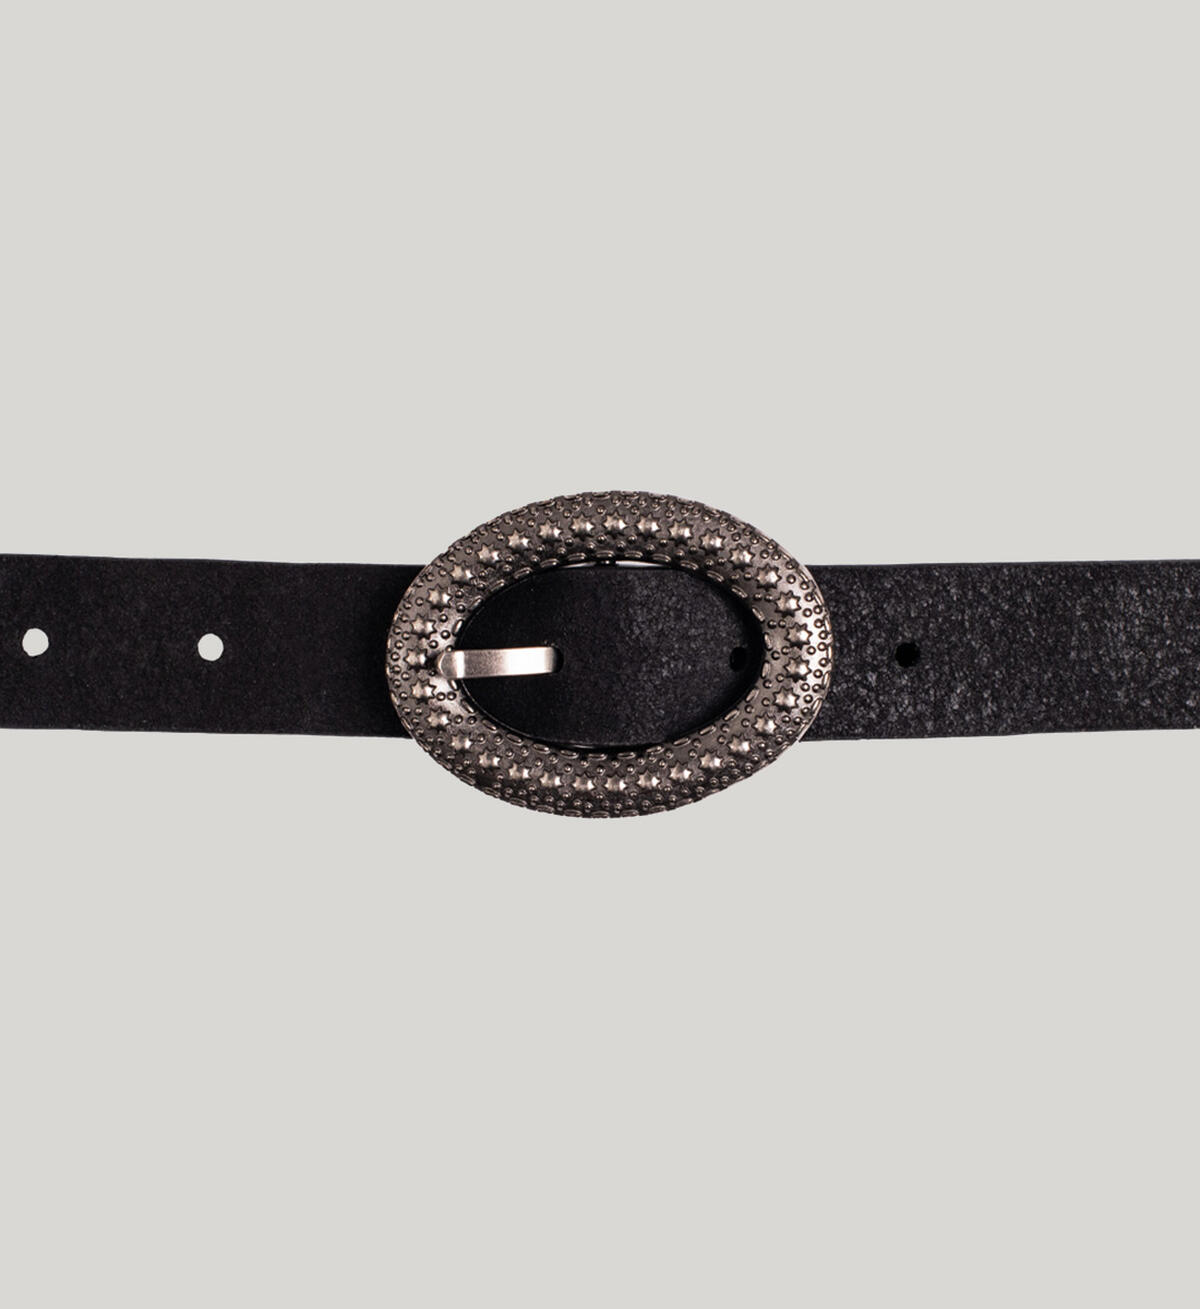 Women's Genuine Leather Belt with Textured Oval Buckle, , hi-res image number 1